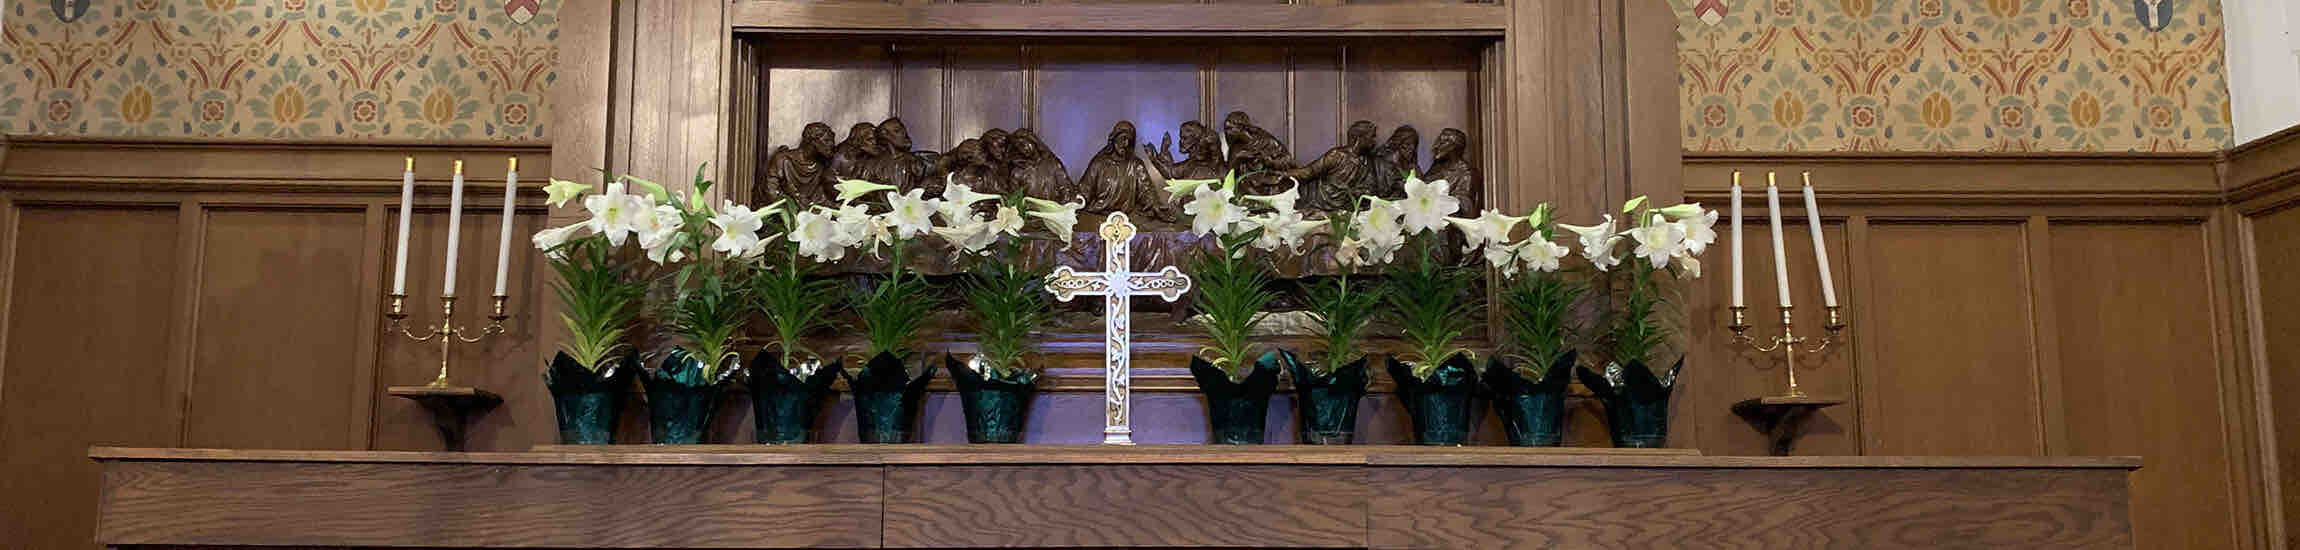 Gold cross surrounded by easter lilies